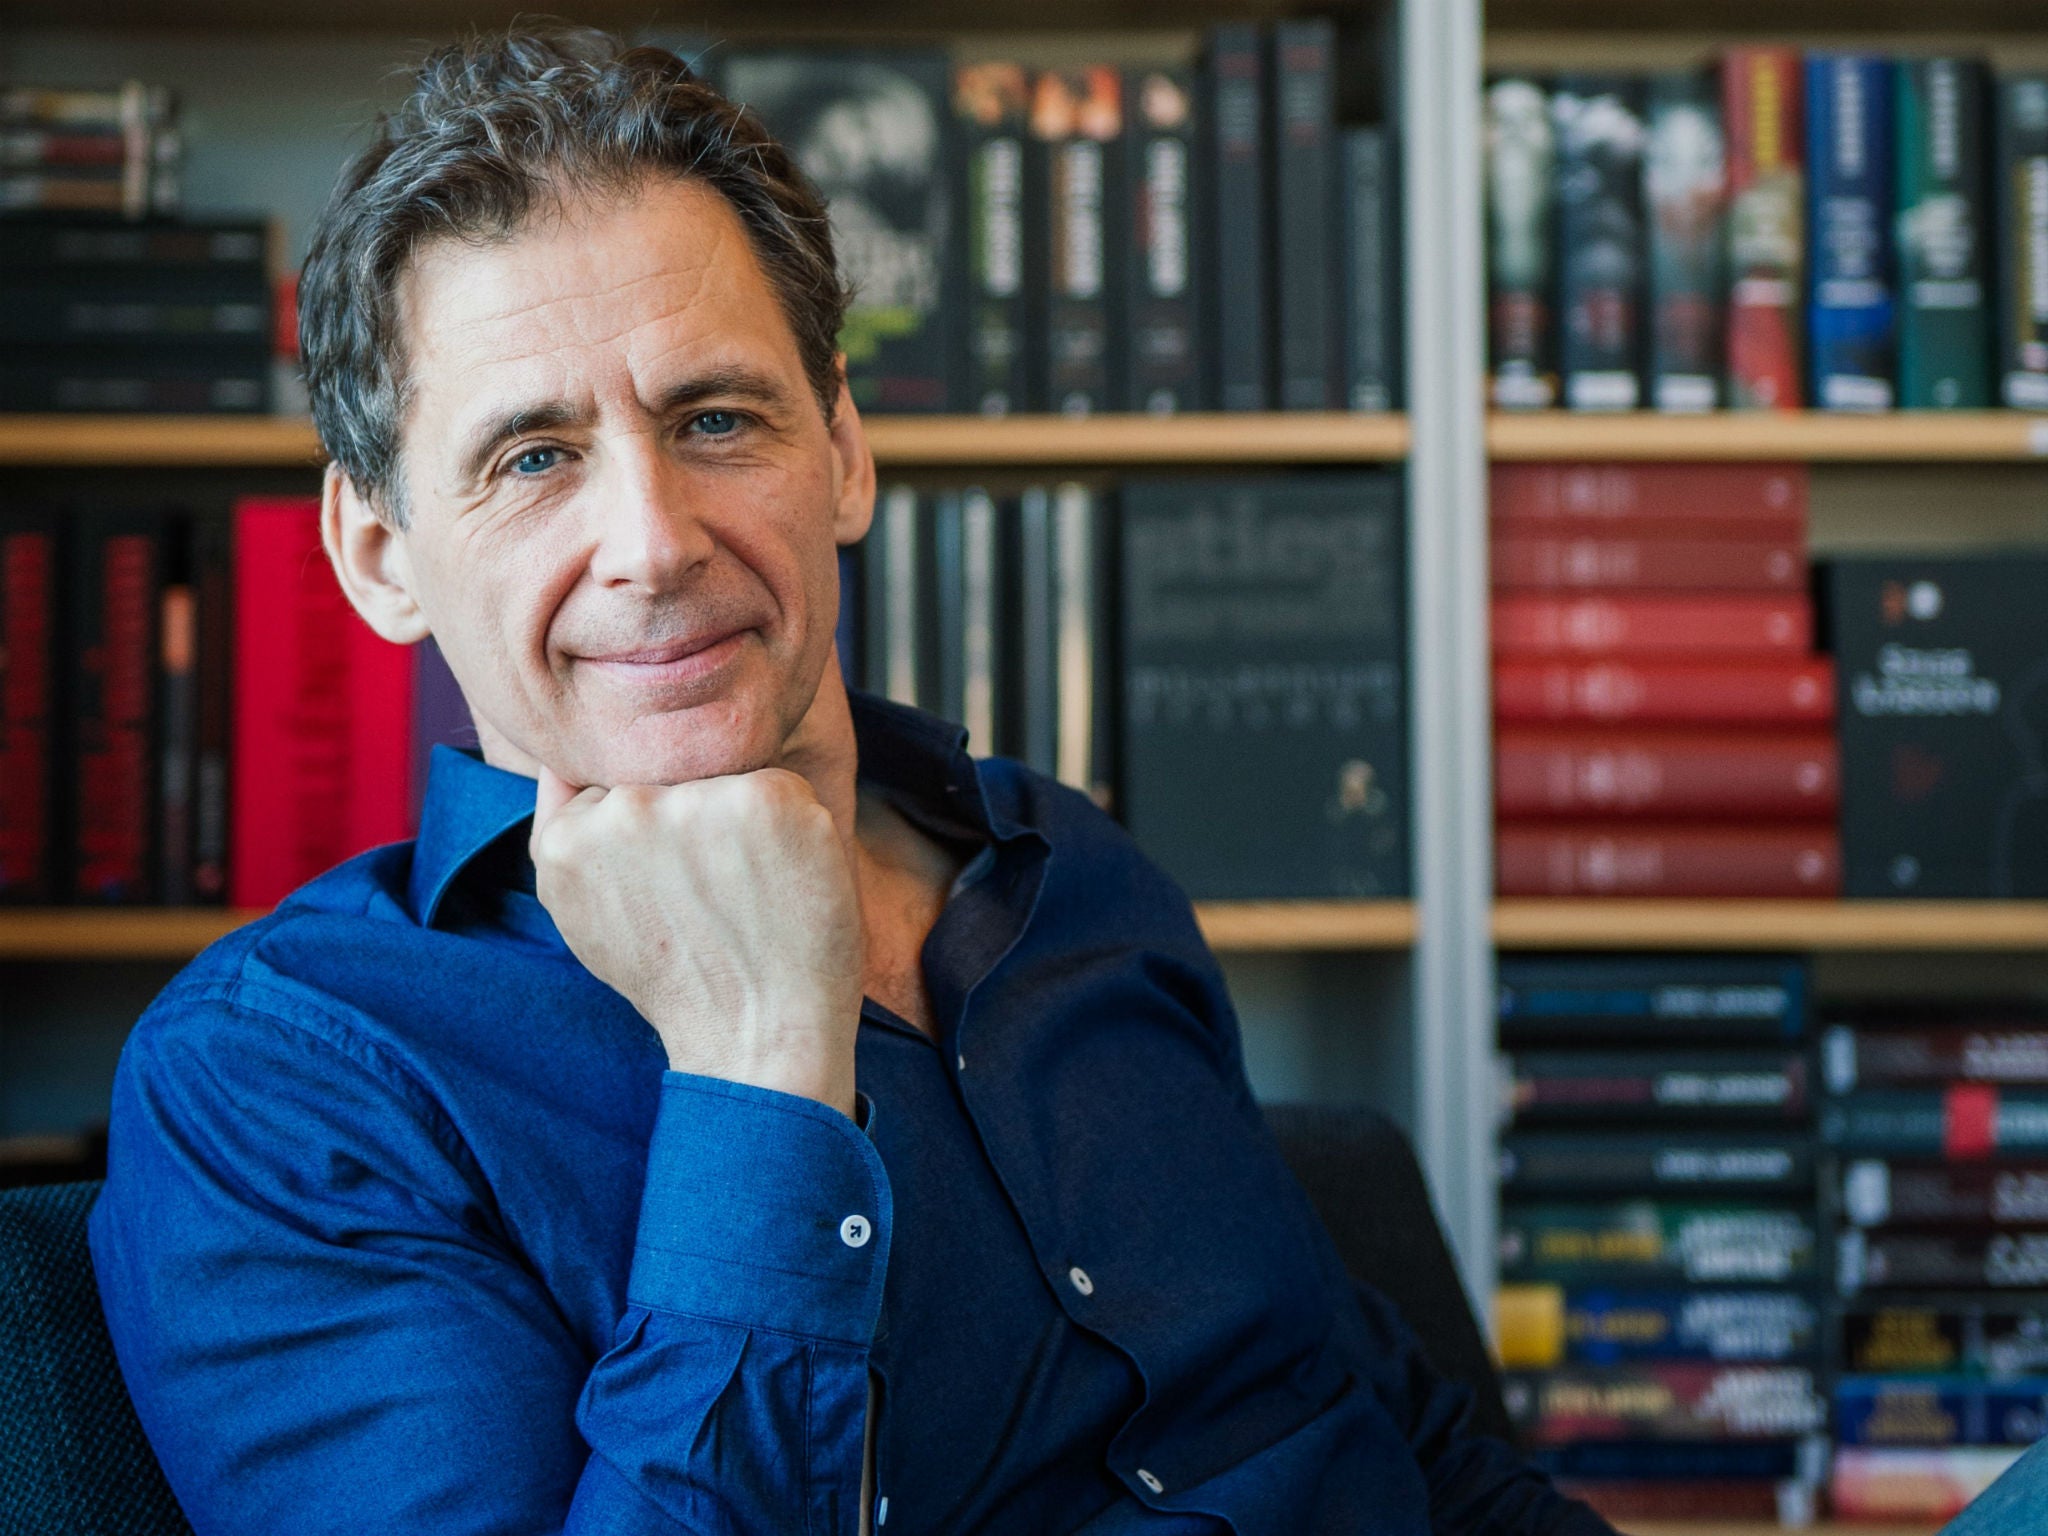 David Lagercrantz, author of The Girl with the Spider's Web